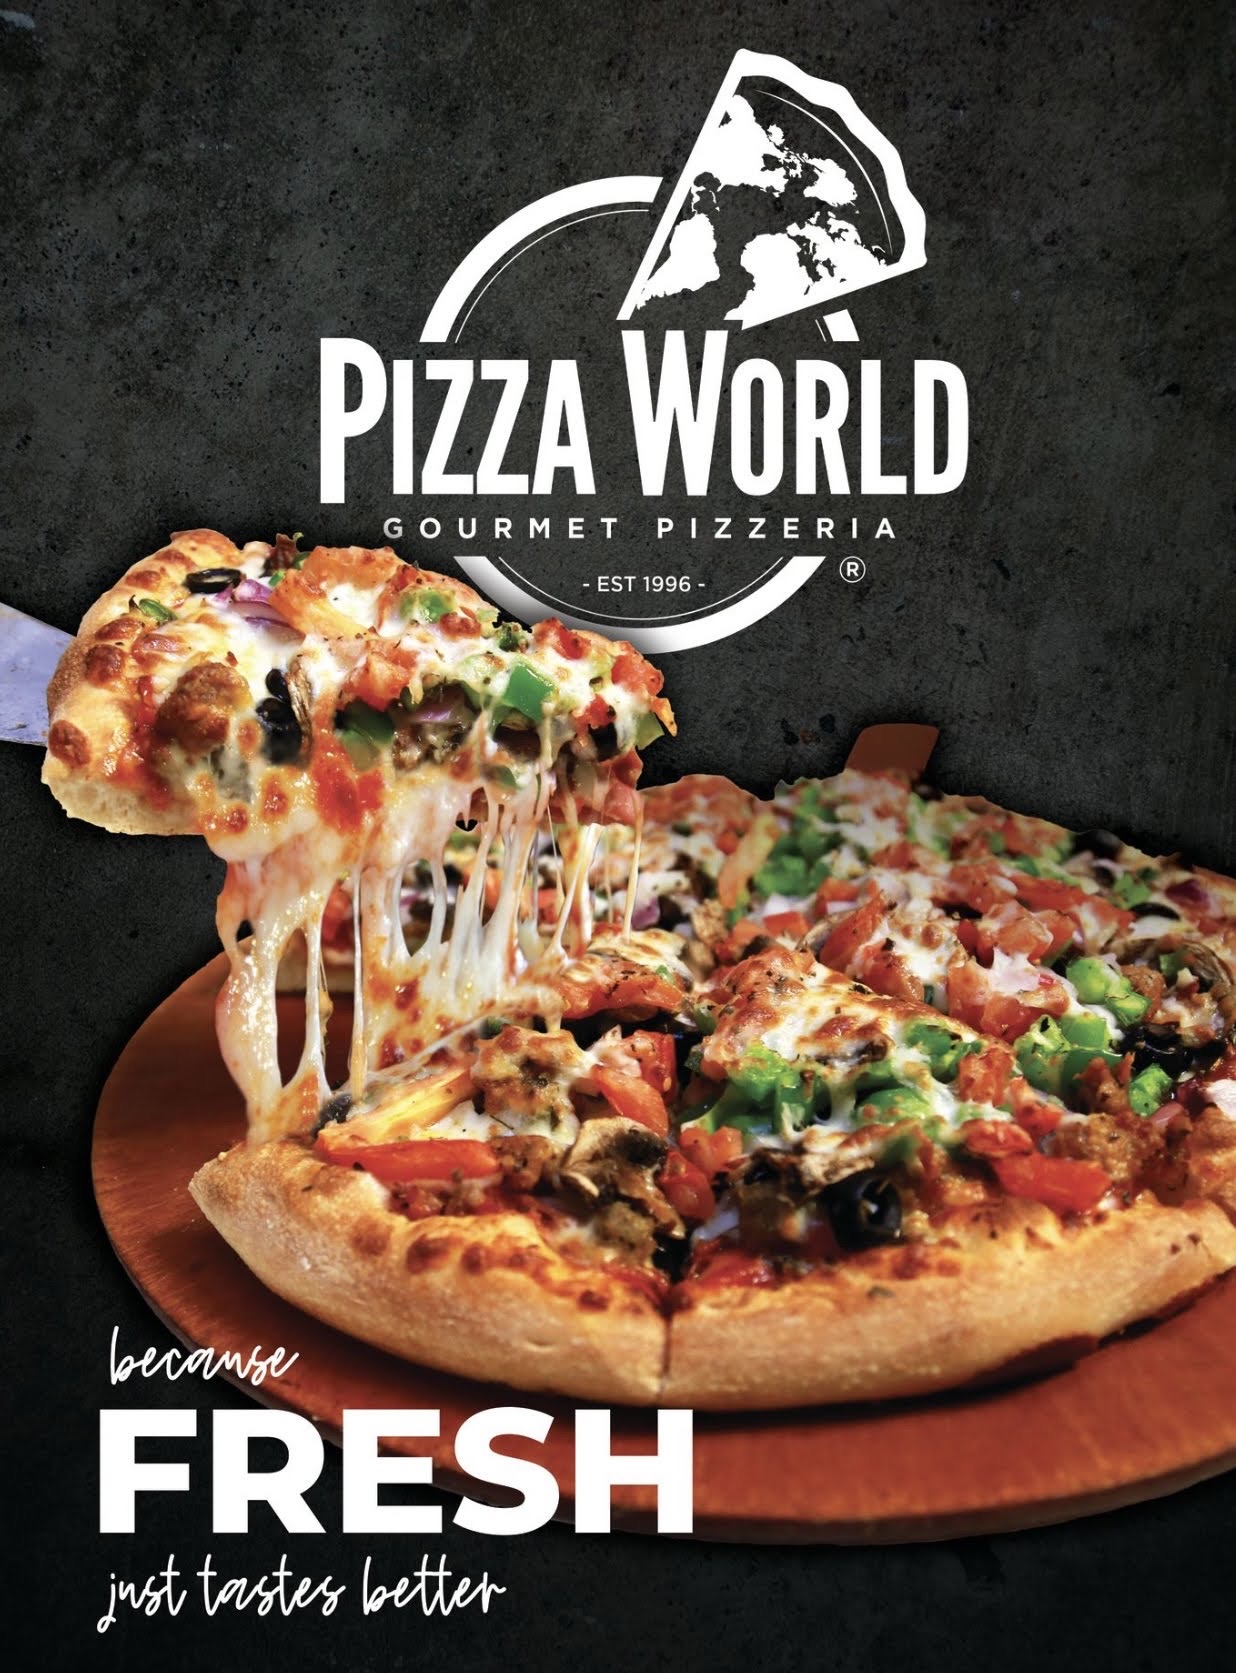 Cape Fair Marina - Pizza World takeout, dine-in, and delivery to your dock - meat lovers pizza